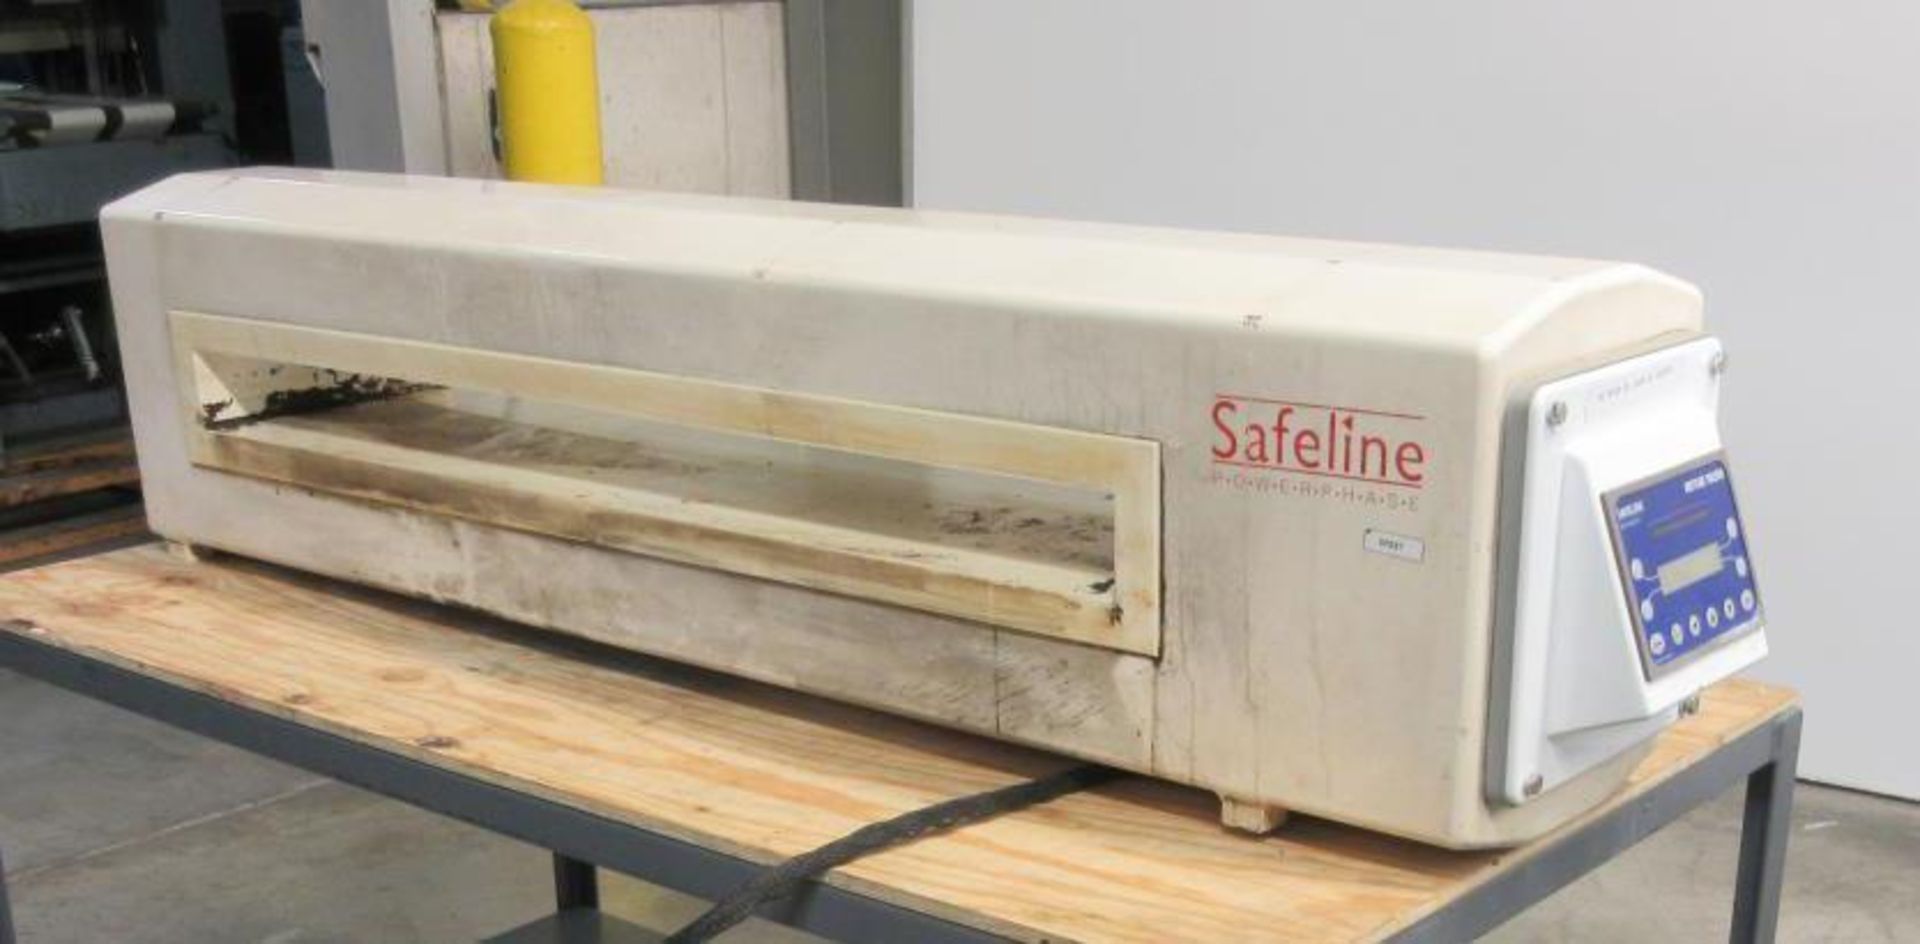 Used- Safeline Model VE-PW-100/300 Metal Detector. 43" wide x 3" tall x 11.5" deep tunnel clearance. - Image 2 of 10